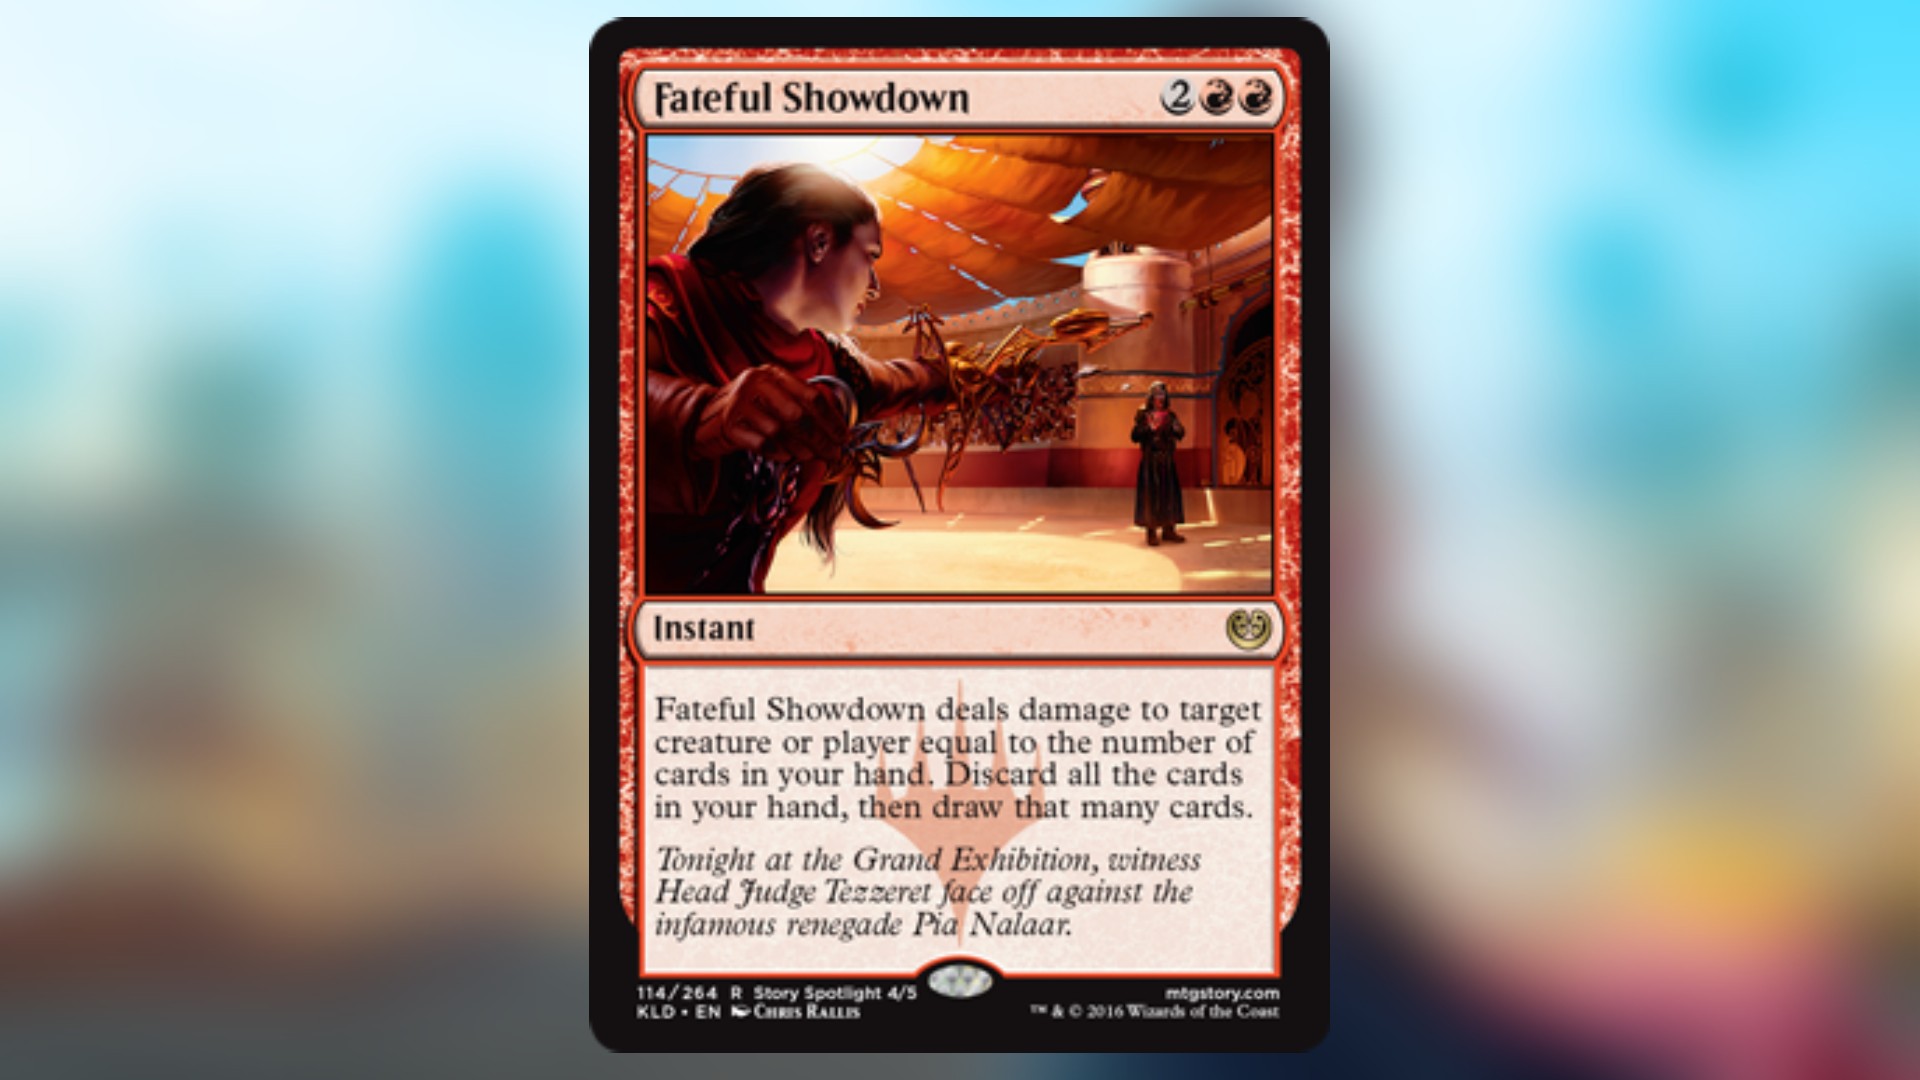 magic the gathering card in red with art of a woman pointing a device at another figure in a crowded arena